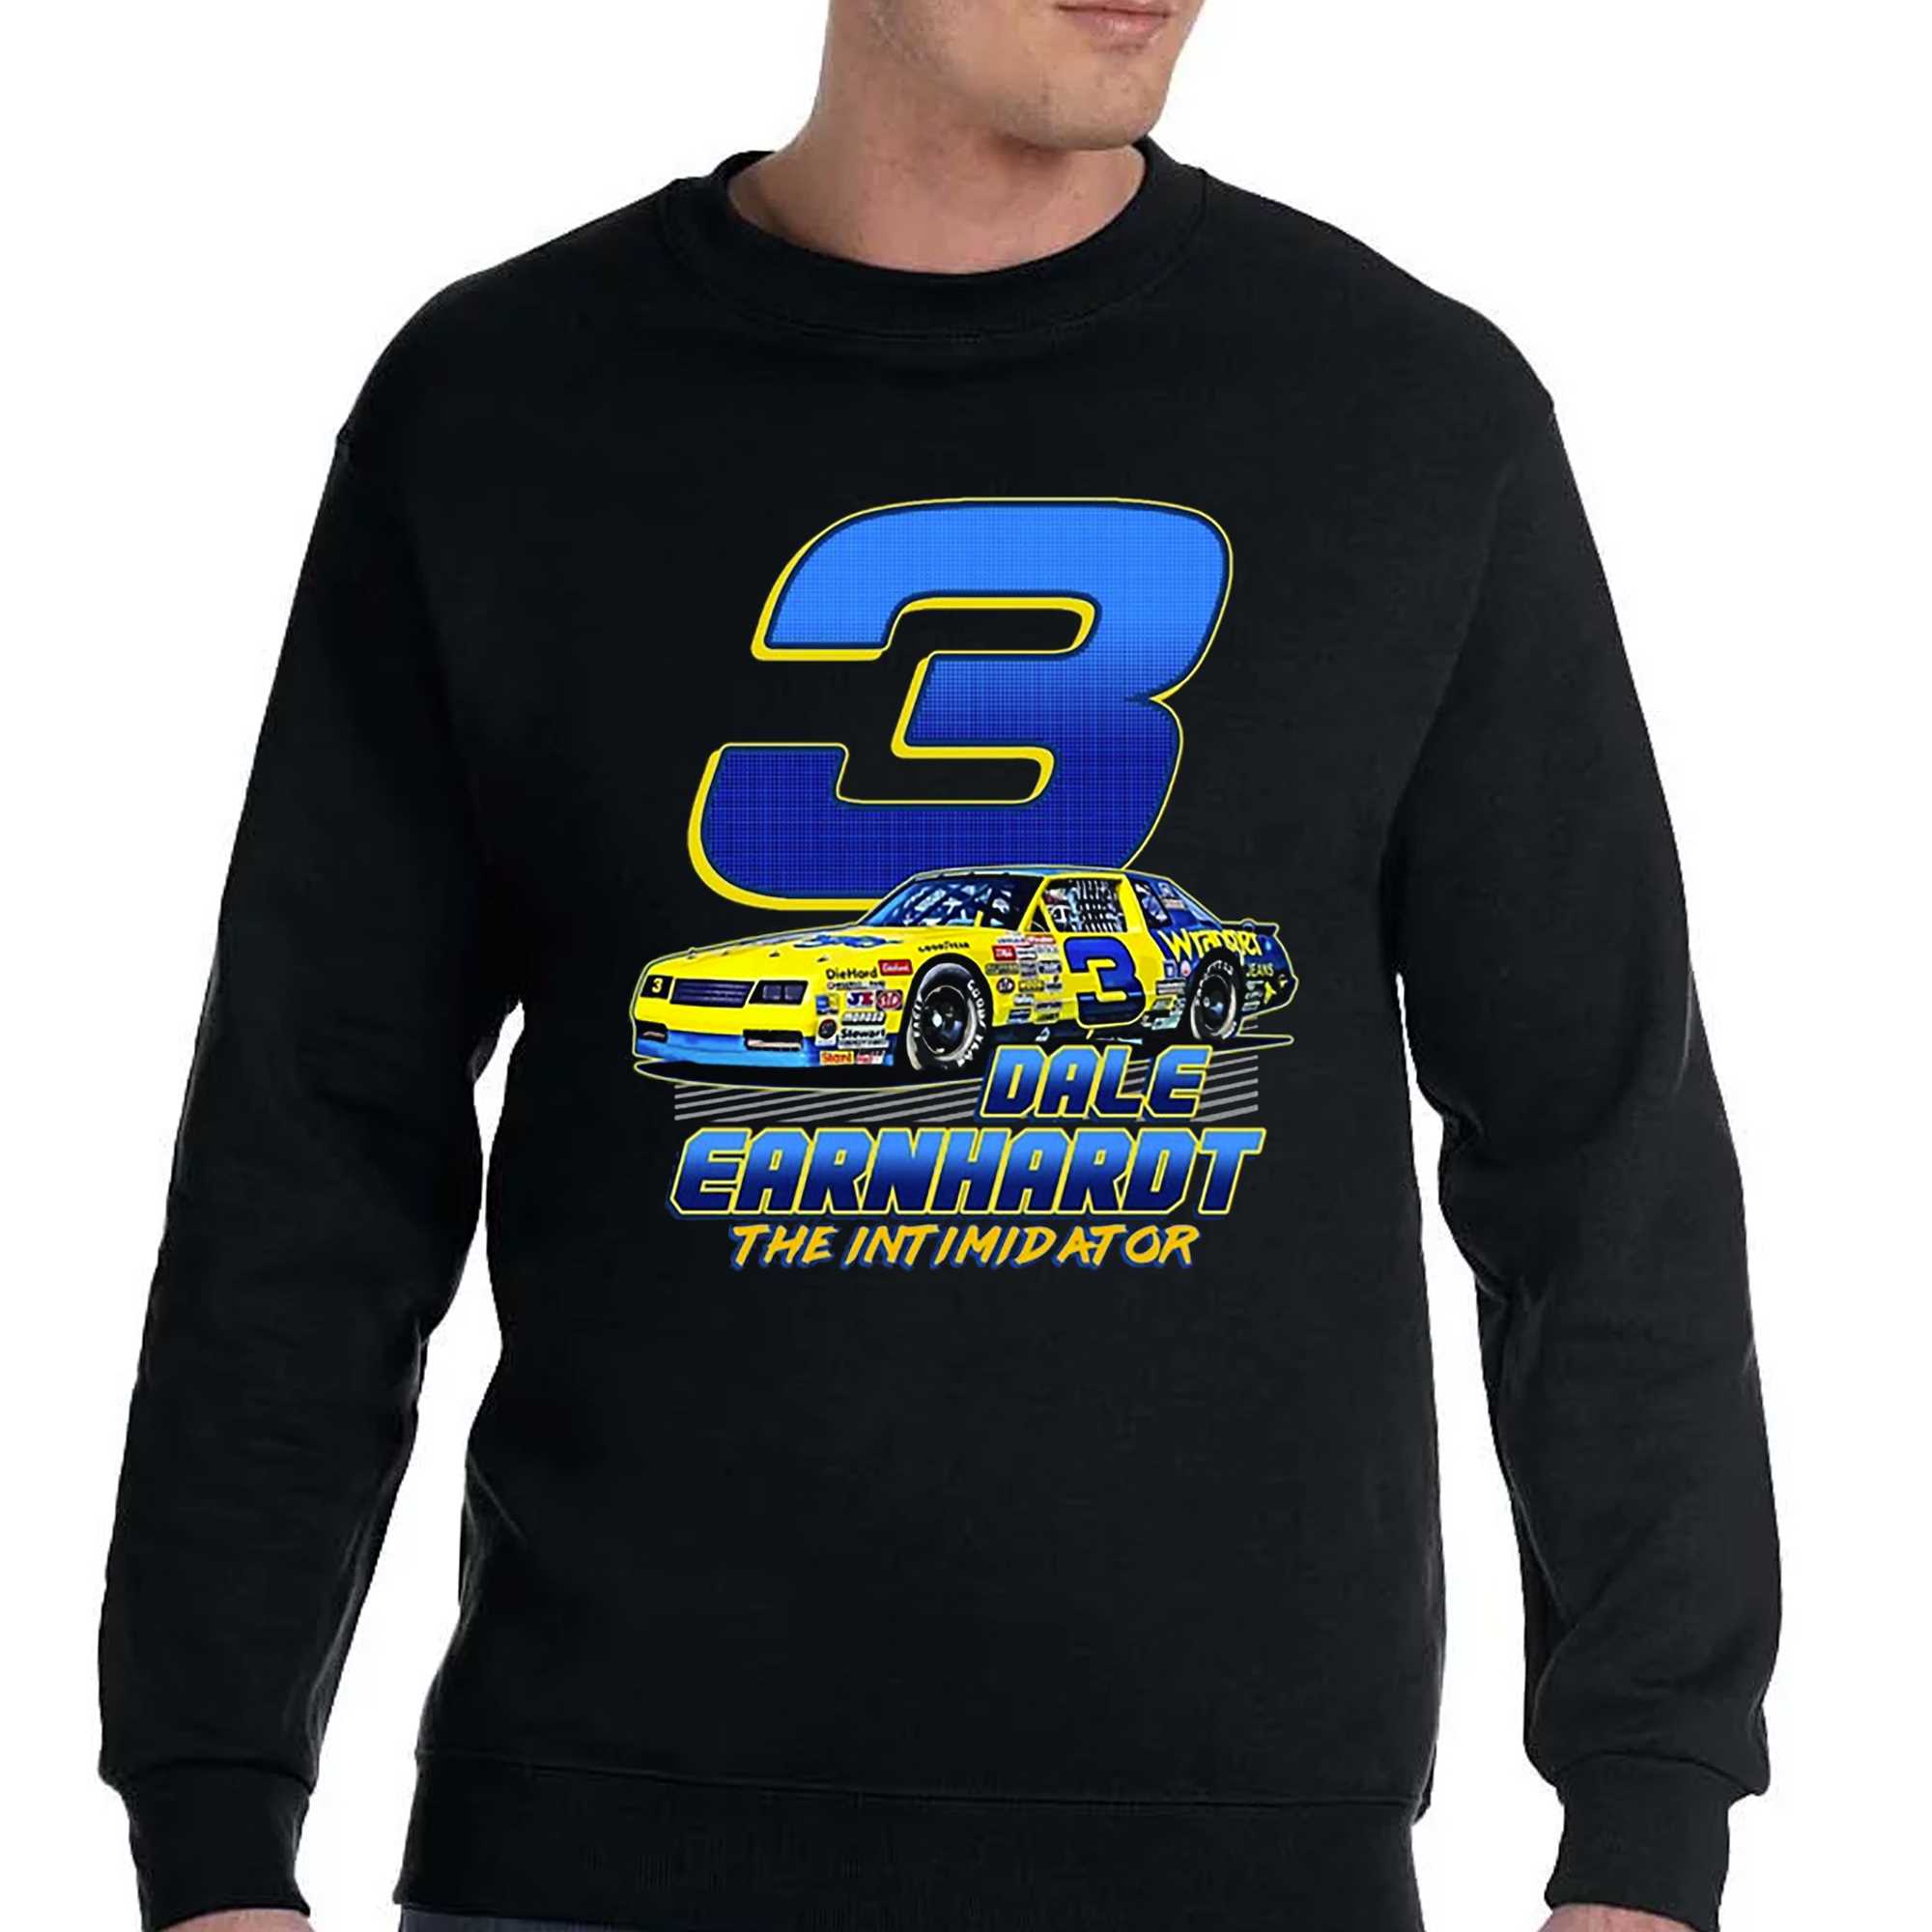 Nascar Drivers 08 Dale Earnhardt The Intimidator T-shirt 